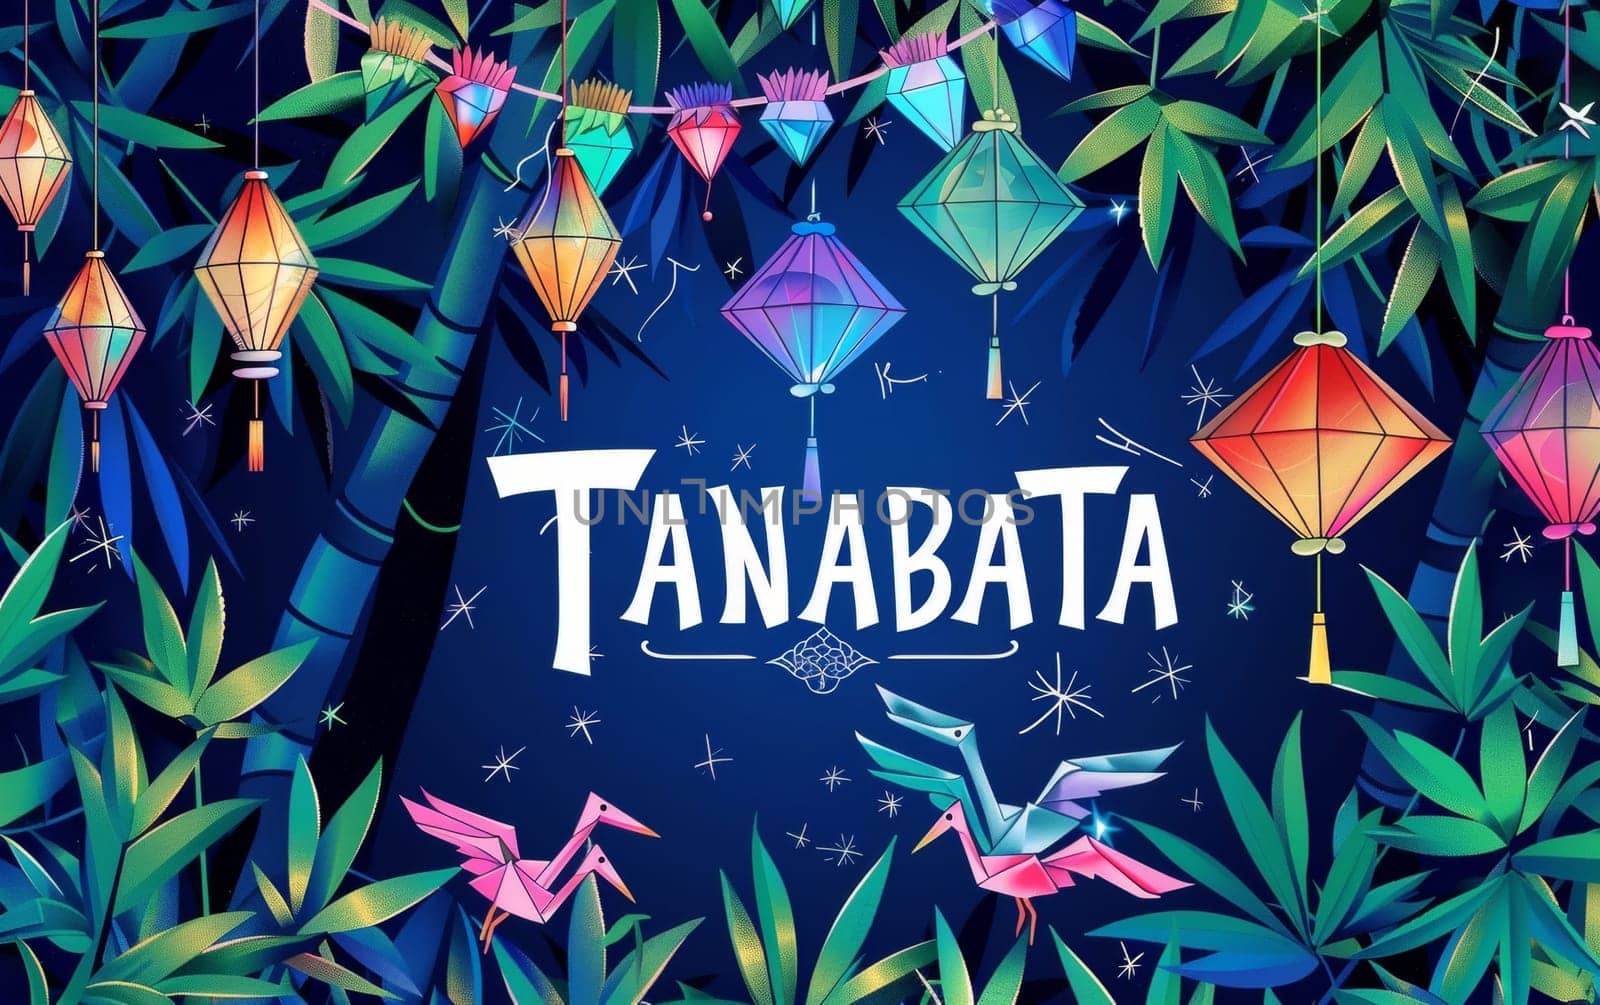 Vibrant Tanabata festival graphic with colorful paper lanterns, origami cranes, and bamboo on a star-filled night sky backdrop. by sfinks